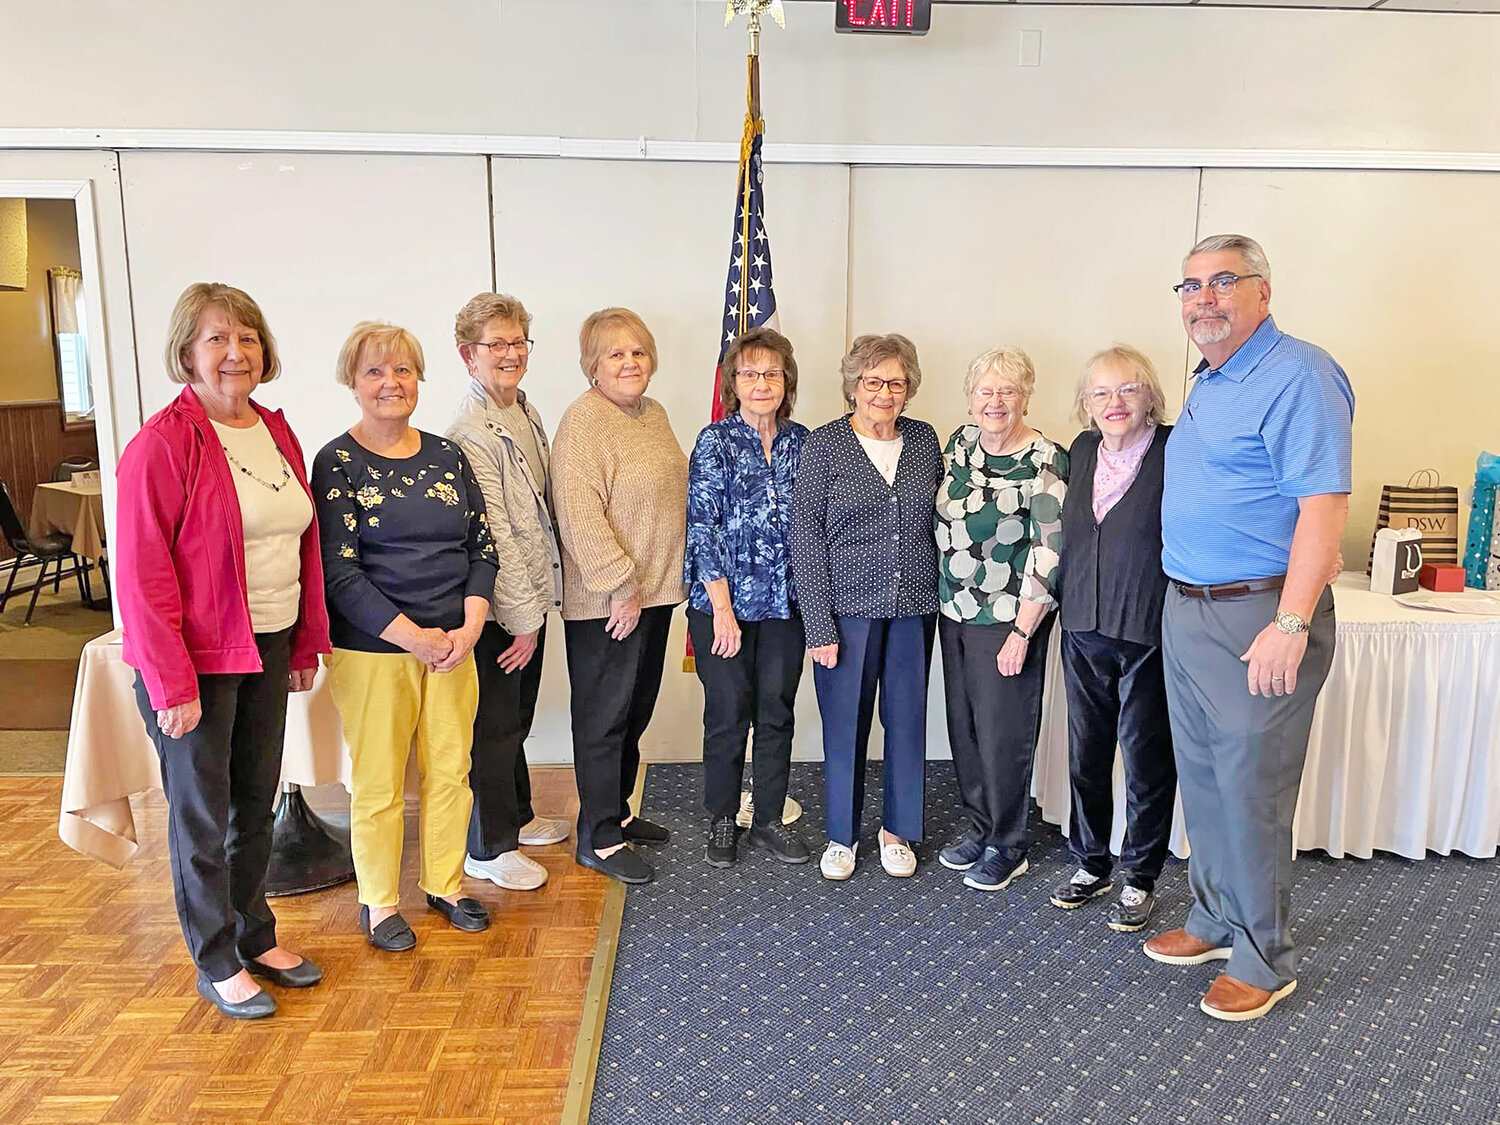 On Tuesday, April 11, the Kirkland Seniors held their Annual Officer Installation Banquet at the Roselawn in New York Mills. The event featured a buffet, entertainment and door prizes donated by the Westmoreland Teachers Association. A wonderful time was enjoyed by all. The group meets every Tuesday at the Kirkland Senior Center, 2 Mill St., Clark Mills, and new members are welcome. In the photo, from left, are board members, Carole Byrne, Cheryl Mody, Mary Lou Hardesty, Sandy Hynes, Sharleen Machold, Bettie Handley, Ceil Gilbert, Mary Wilbanks and Director, Jim Nolan.